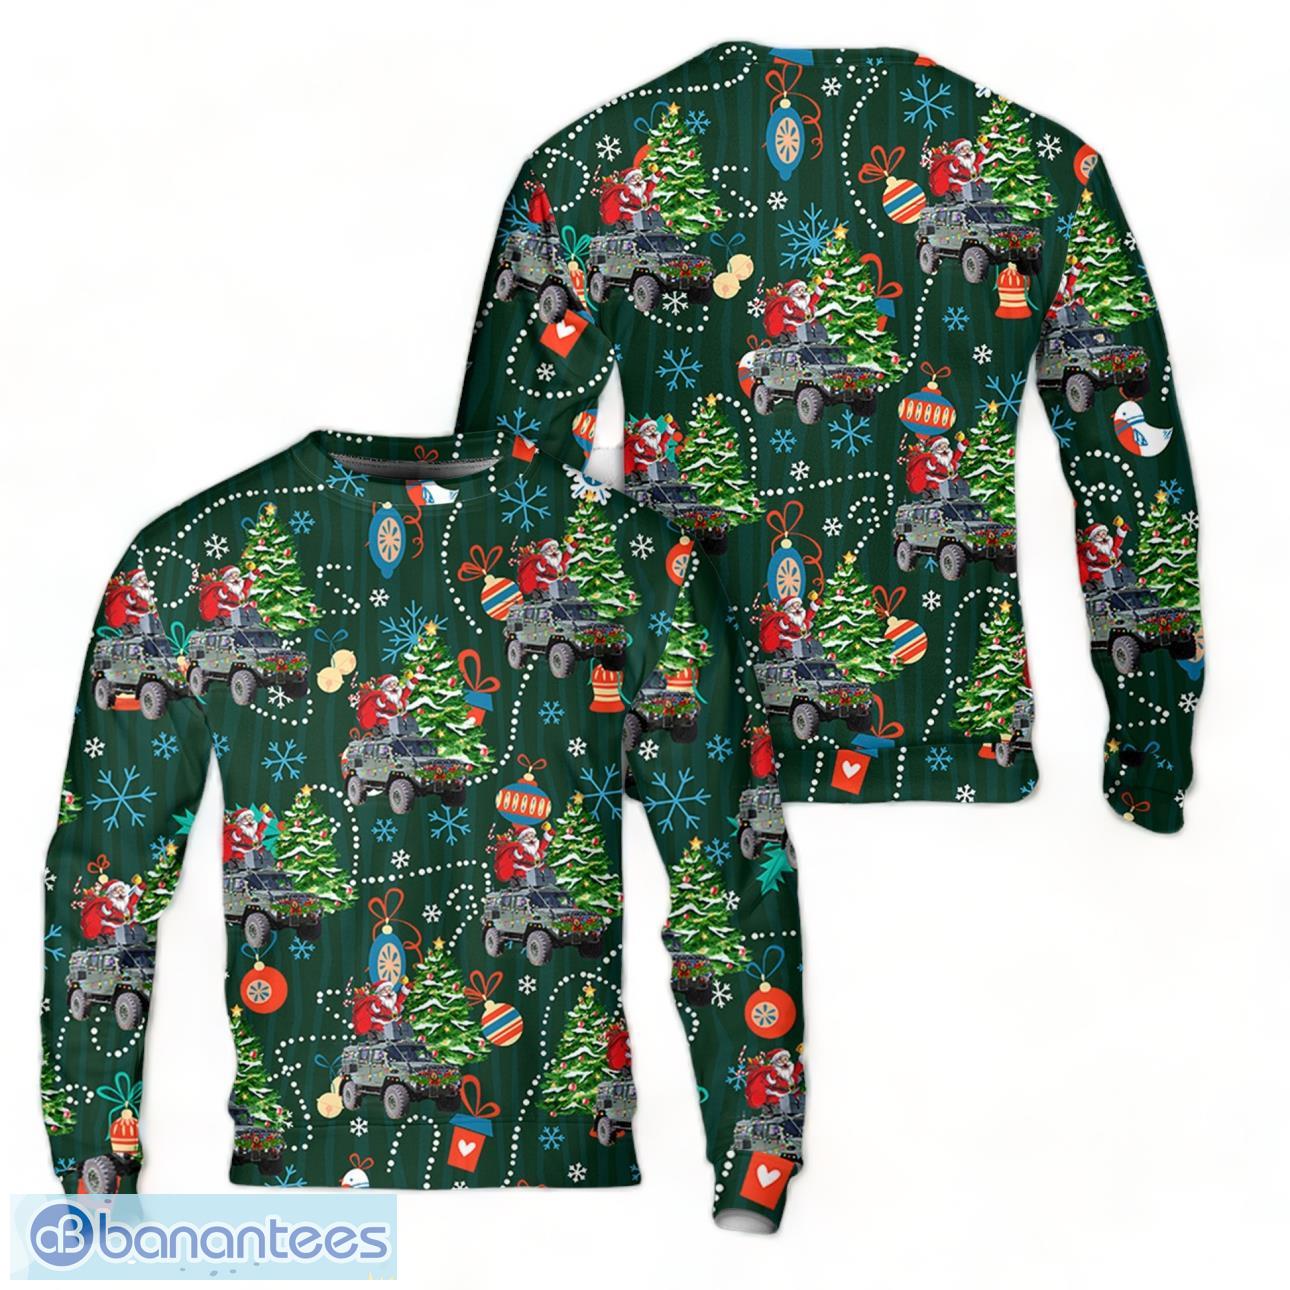 Swedish Army RG-32 Scout Terrangbil 16 Christmas Sweater Product Photo 1